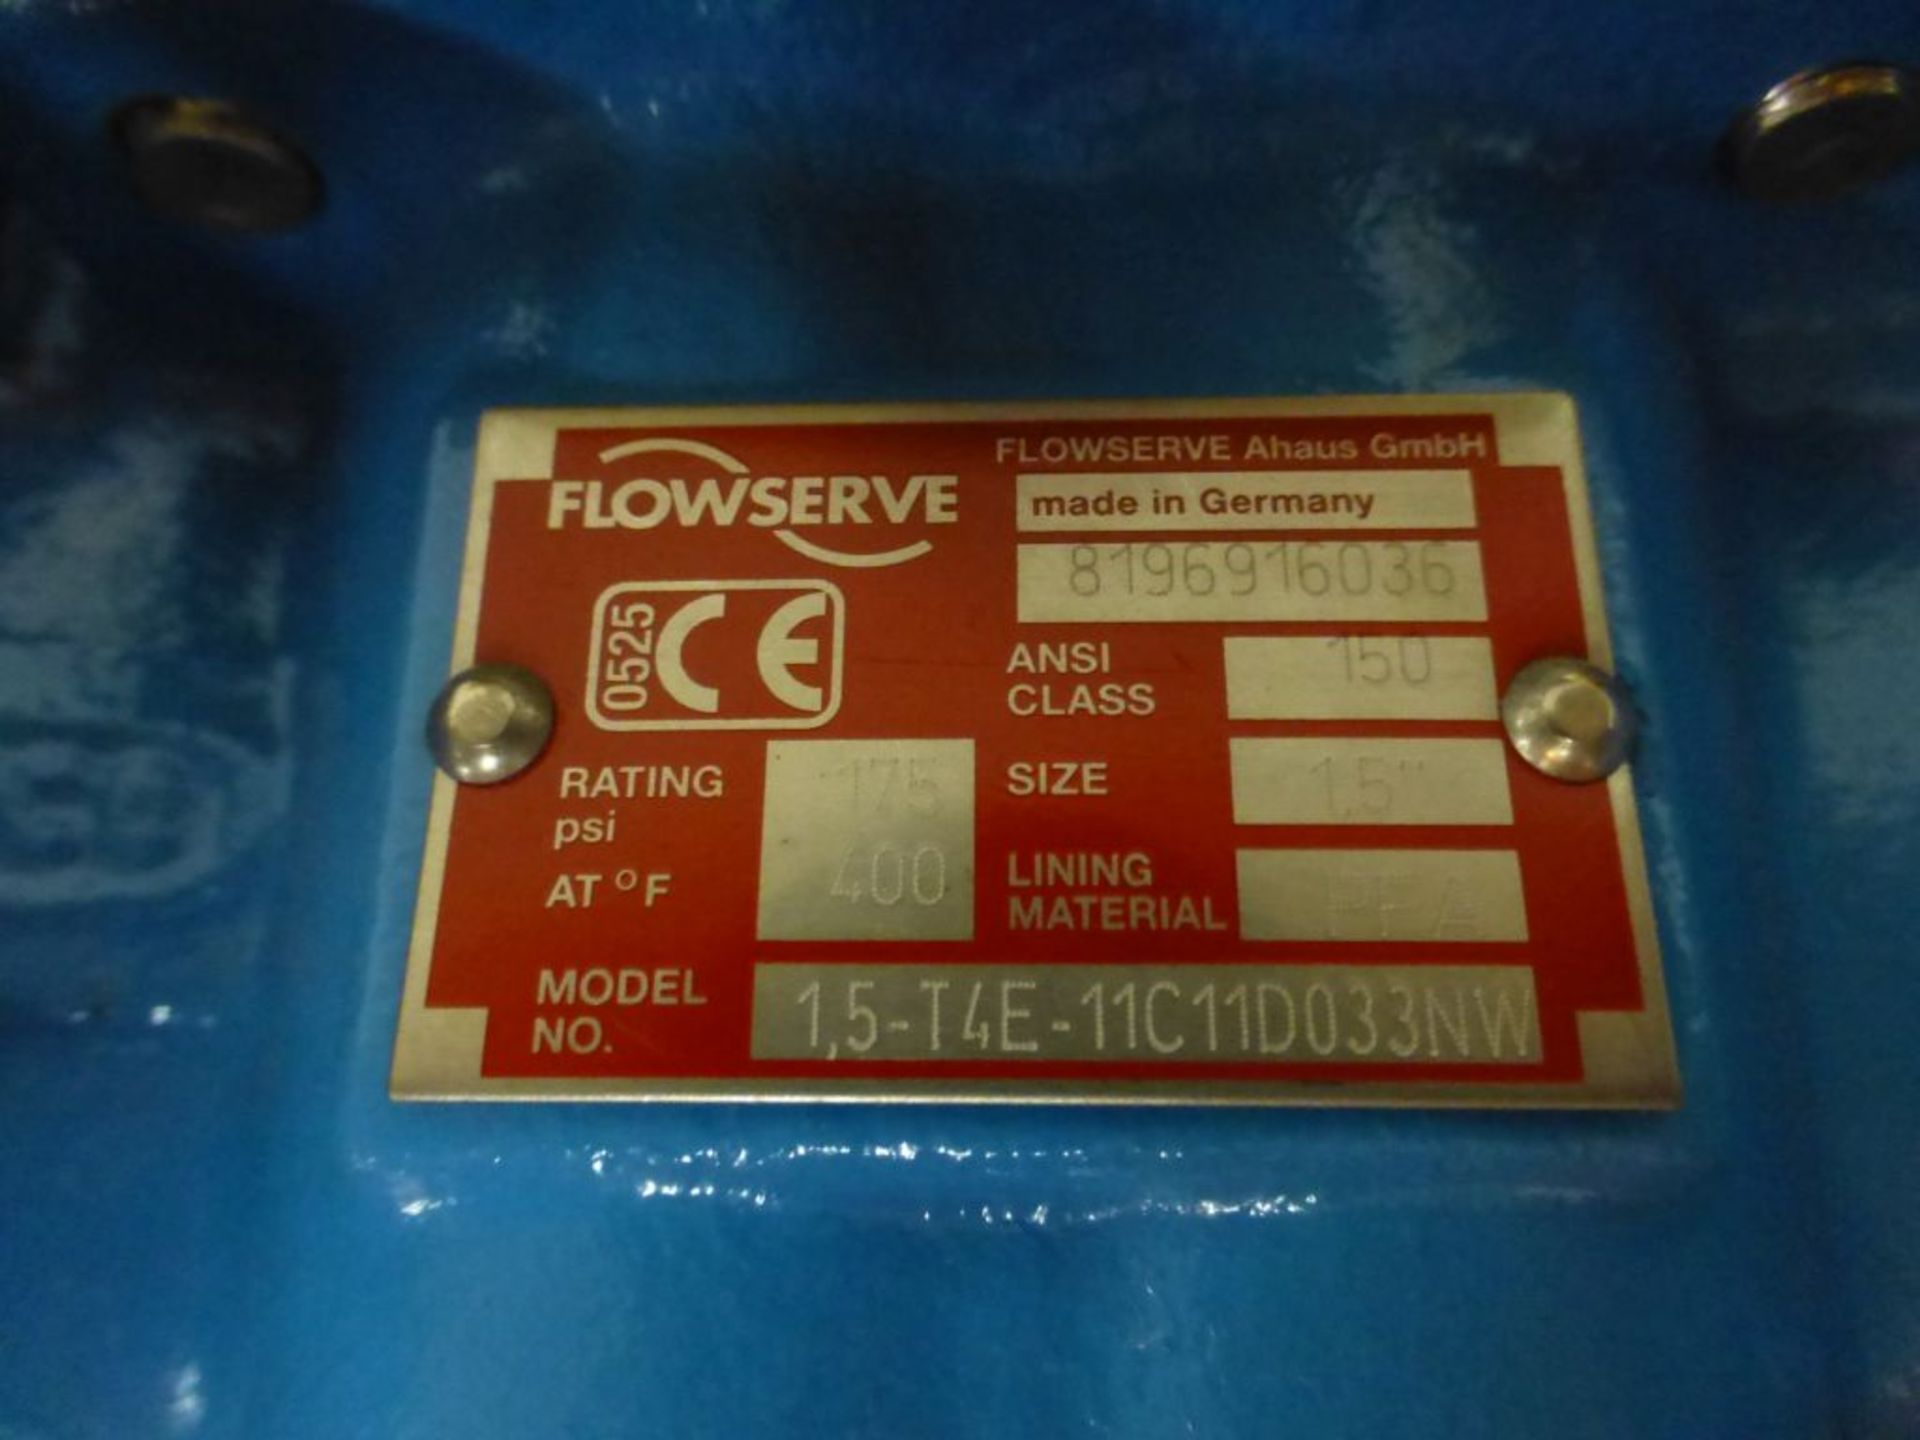 Lot of (2) Assorted Valves - (1) Flowserve Model No. 1.5-T4E-11C11D033NW, Size: 1.5"; (1) Xomox - Image 2 of 6